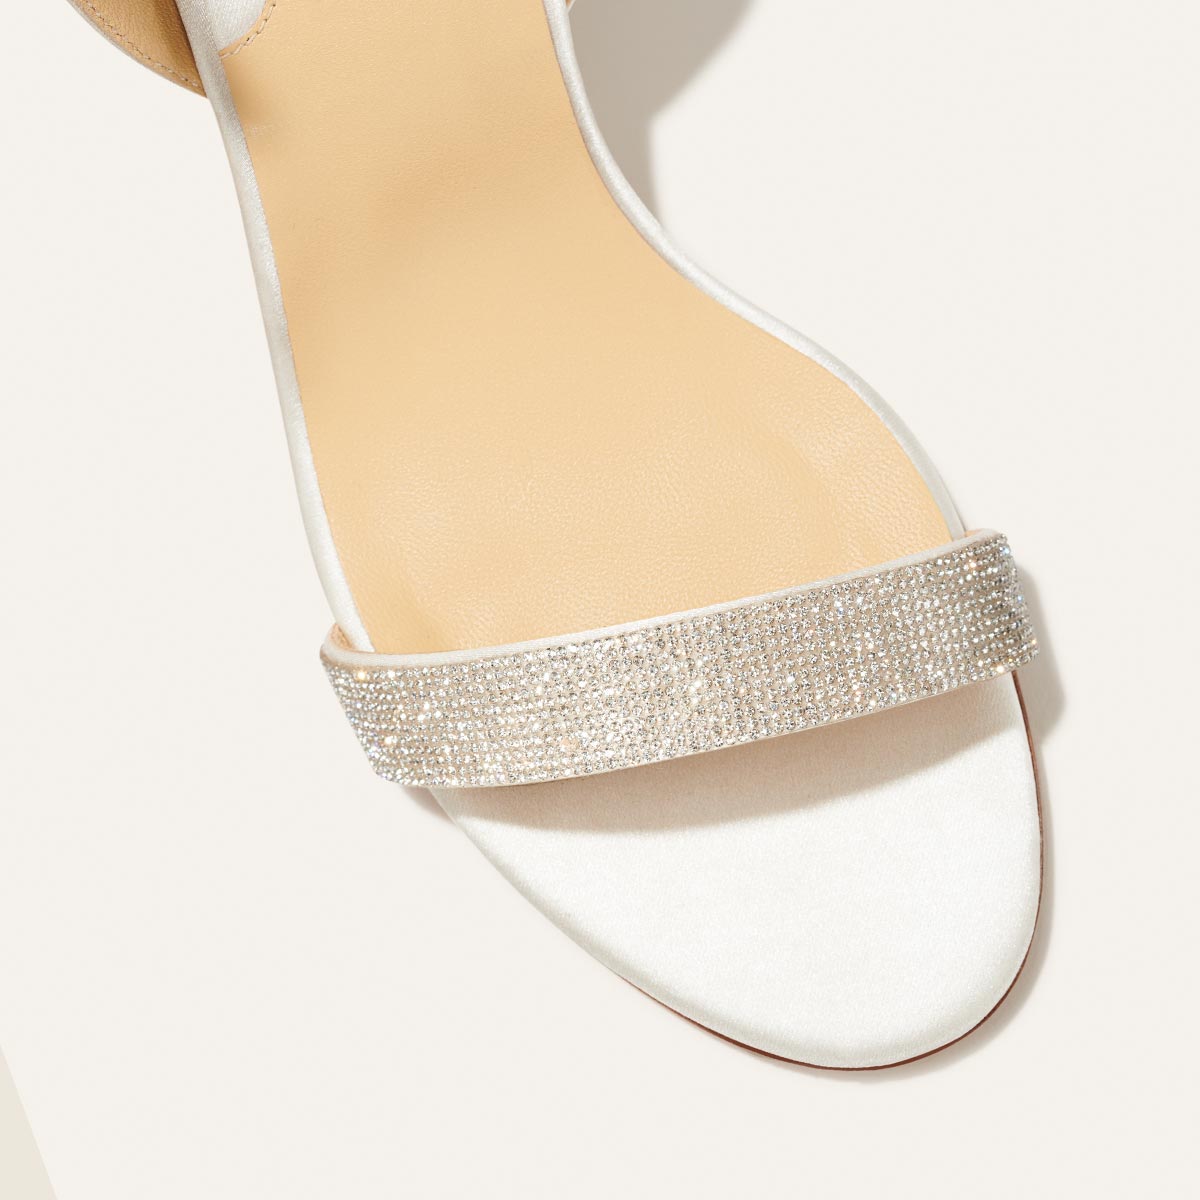 The Stella Sandal - Ivory Satin with Crystals